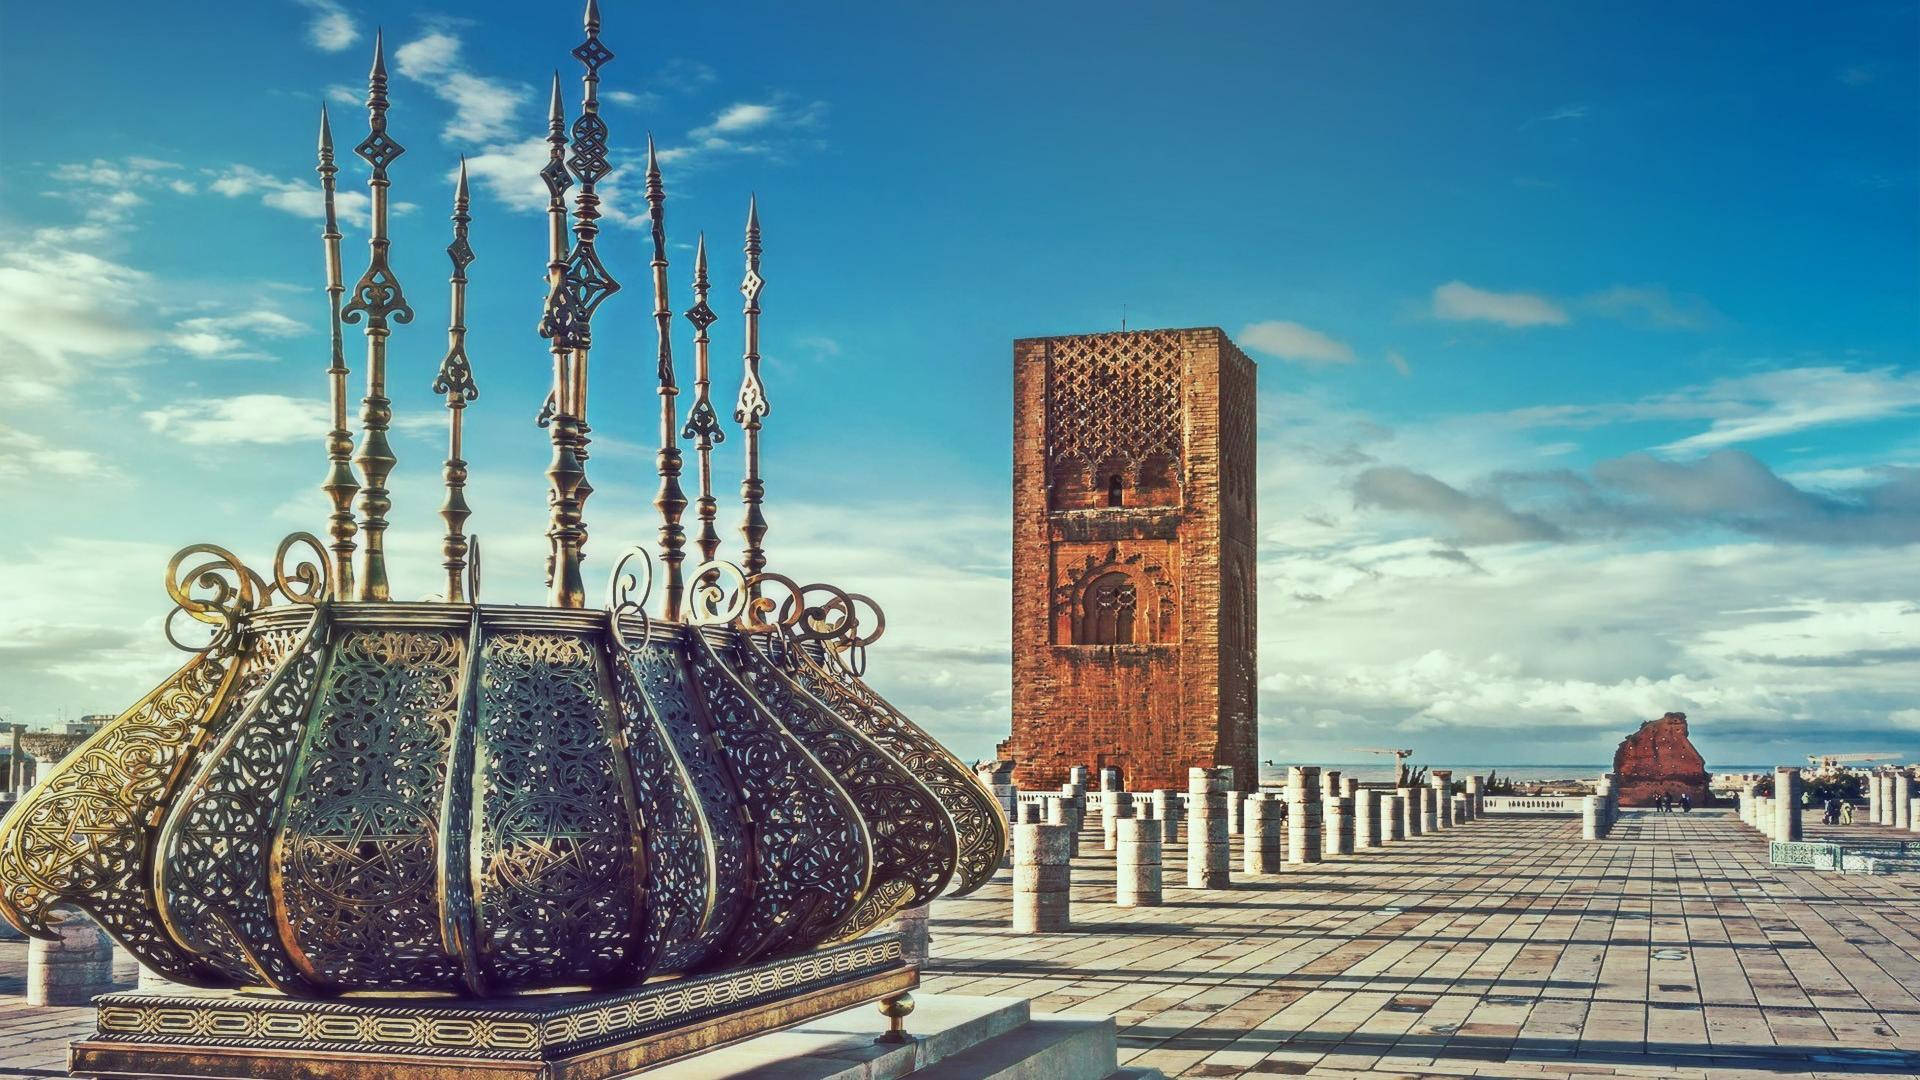 Hassan Tower In Morocco Wallpaper